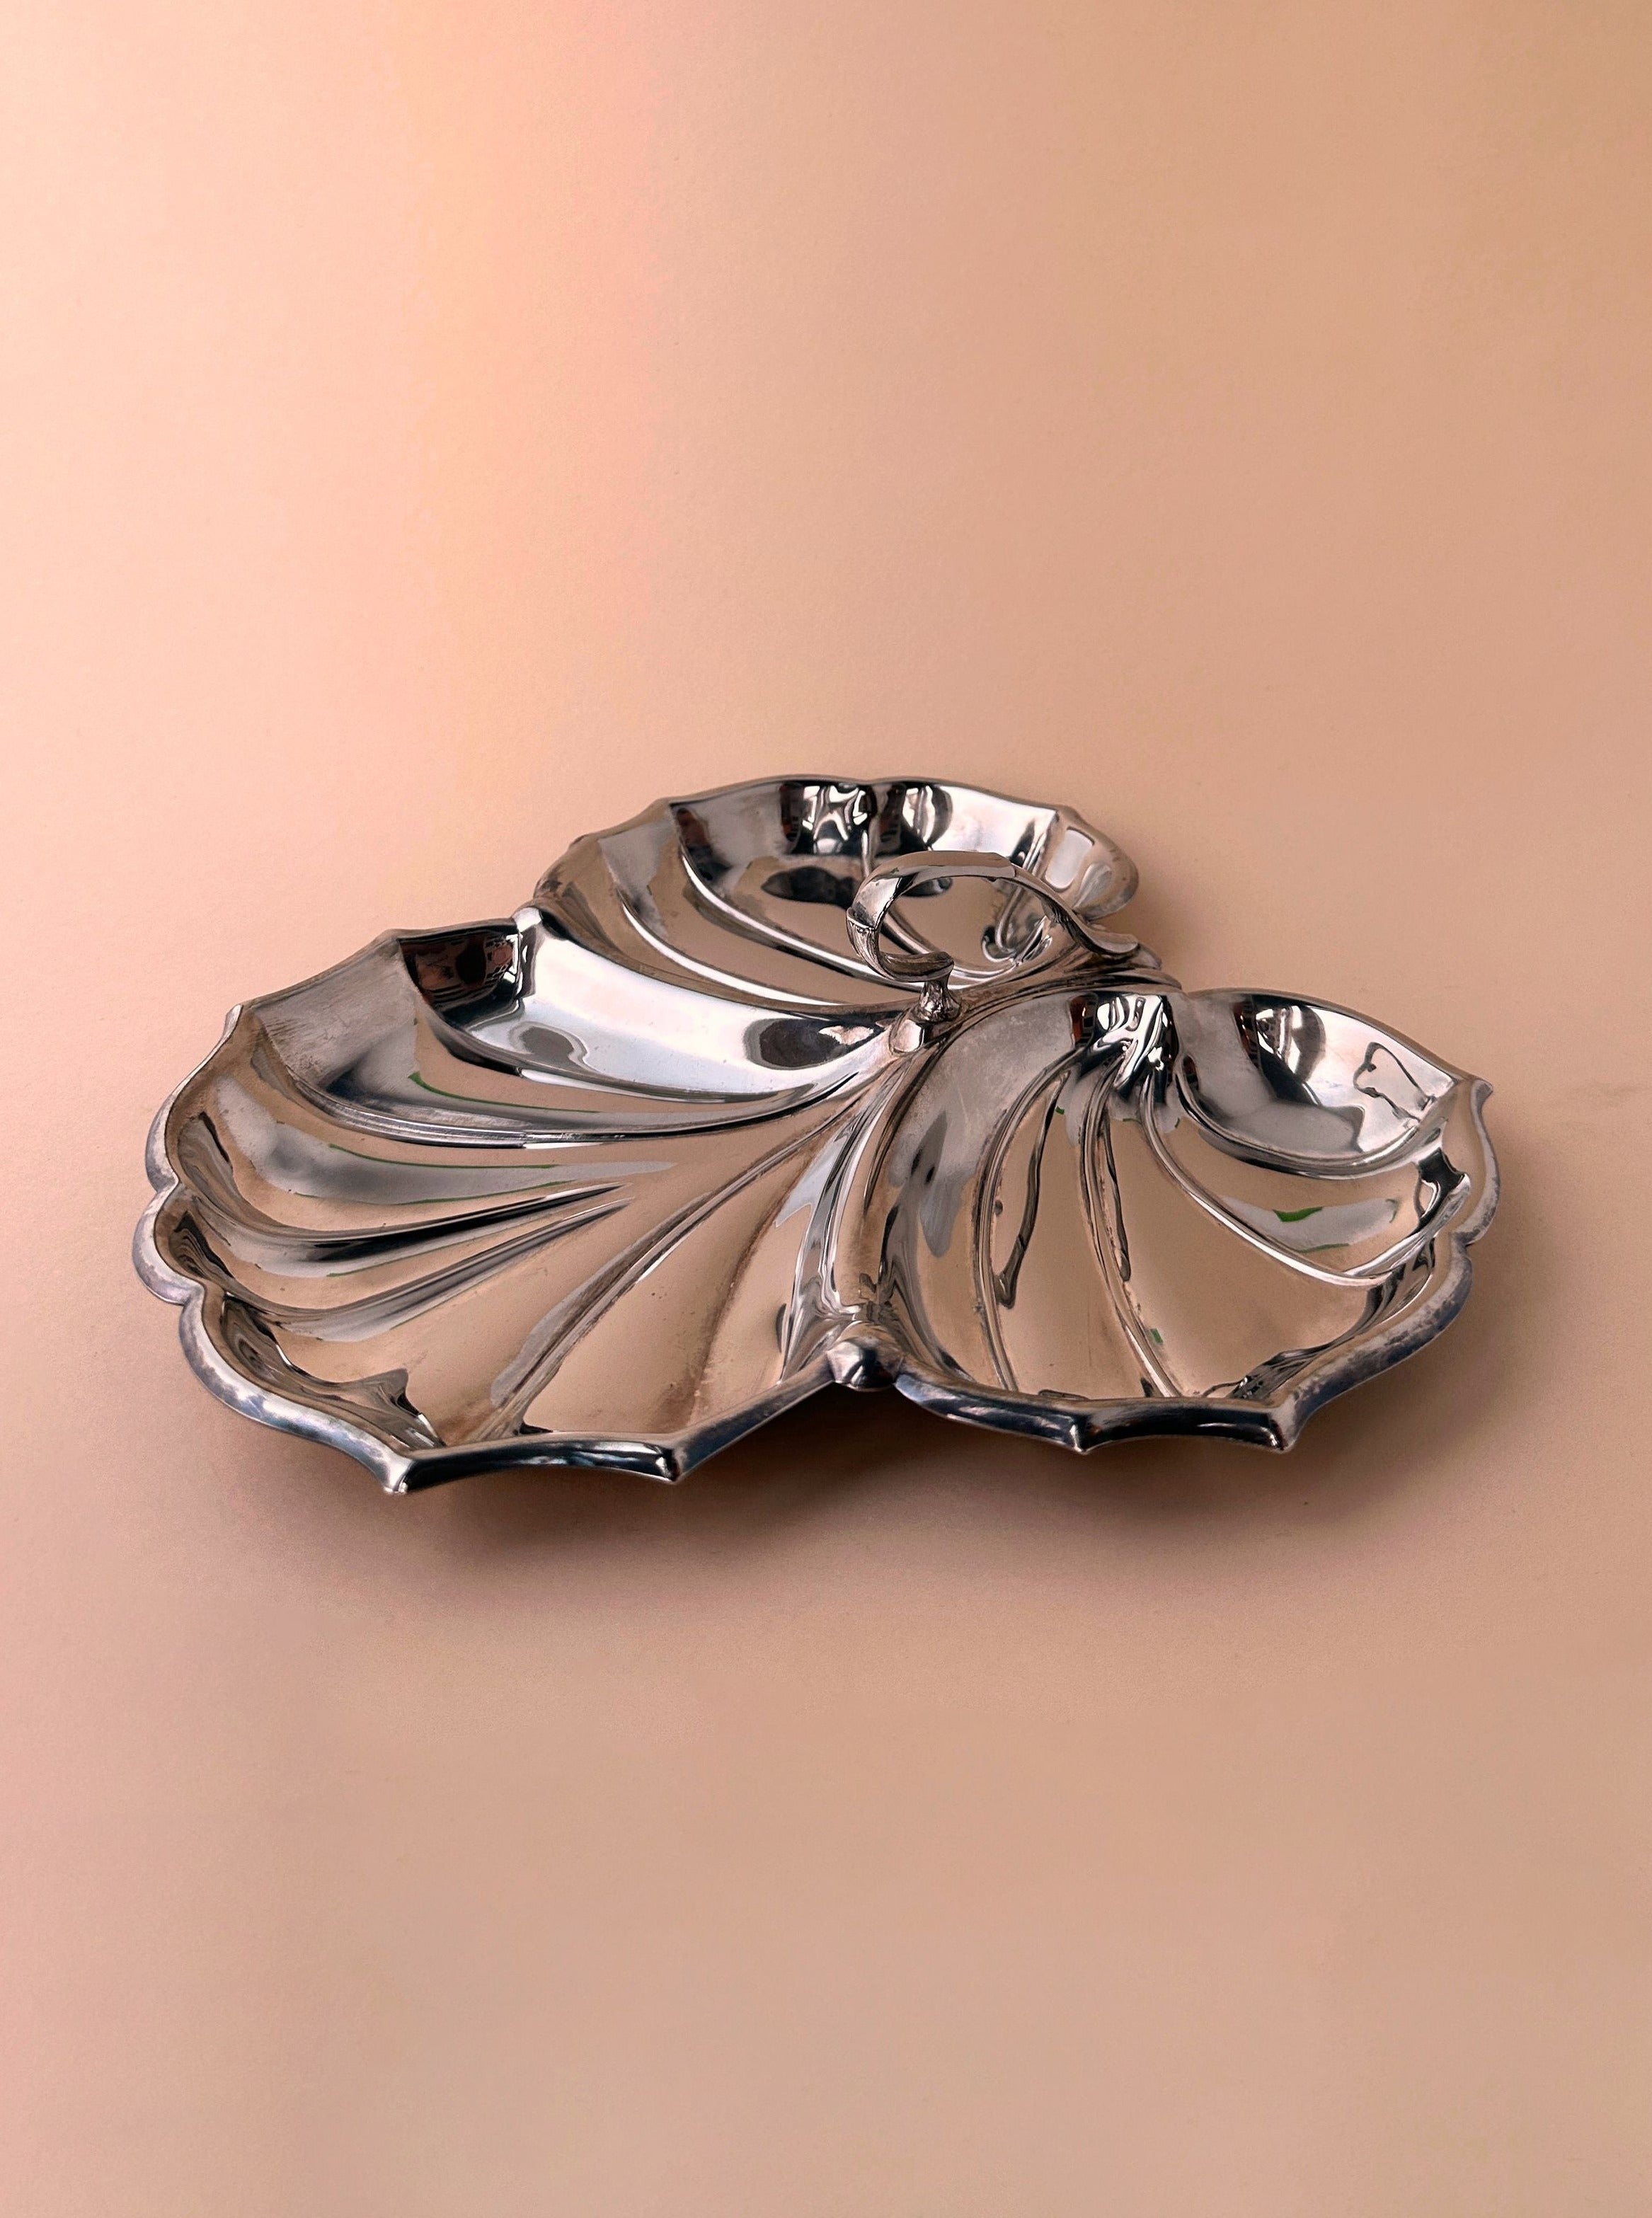 Silver Plated Shell Shaped Tender in Art Deco Revival Style